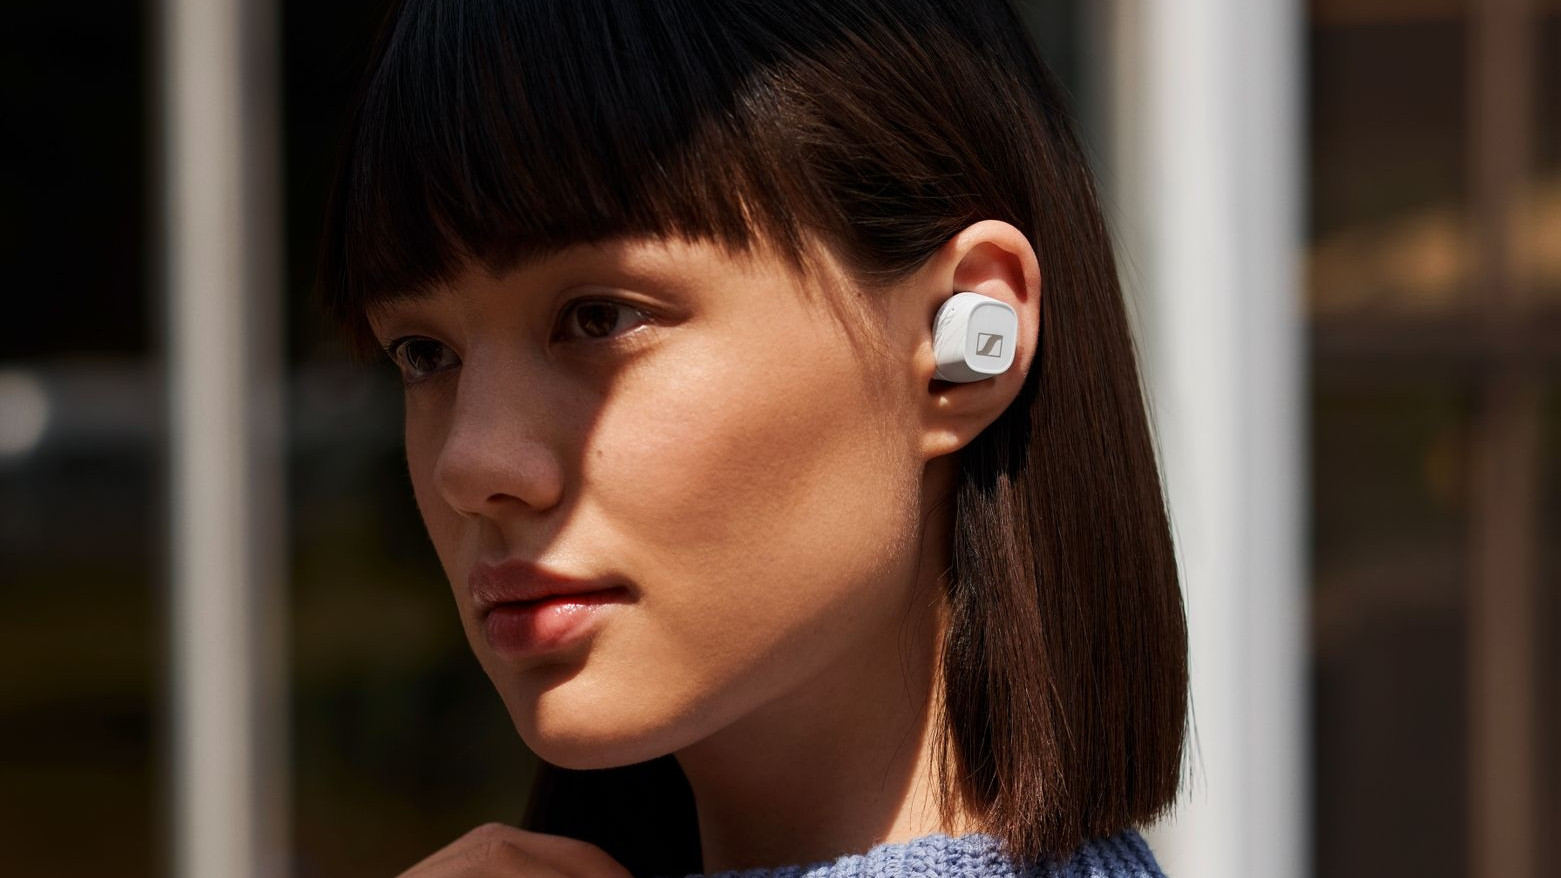 Sennhesier CX-400BT wireless earbuds worn by a young lady